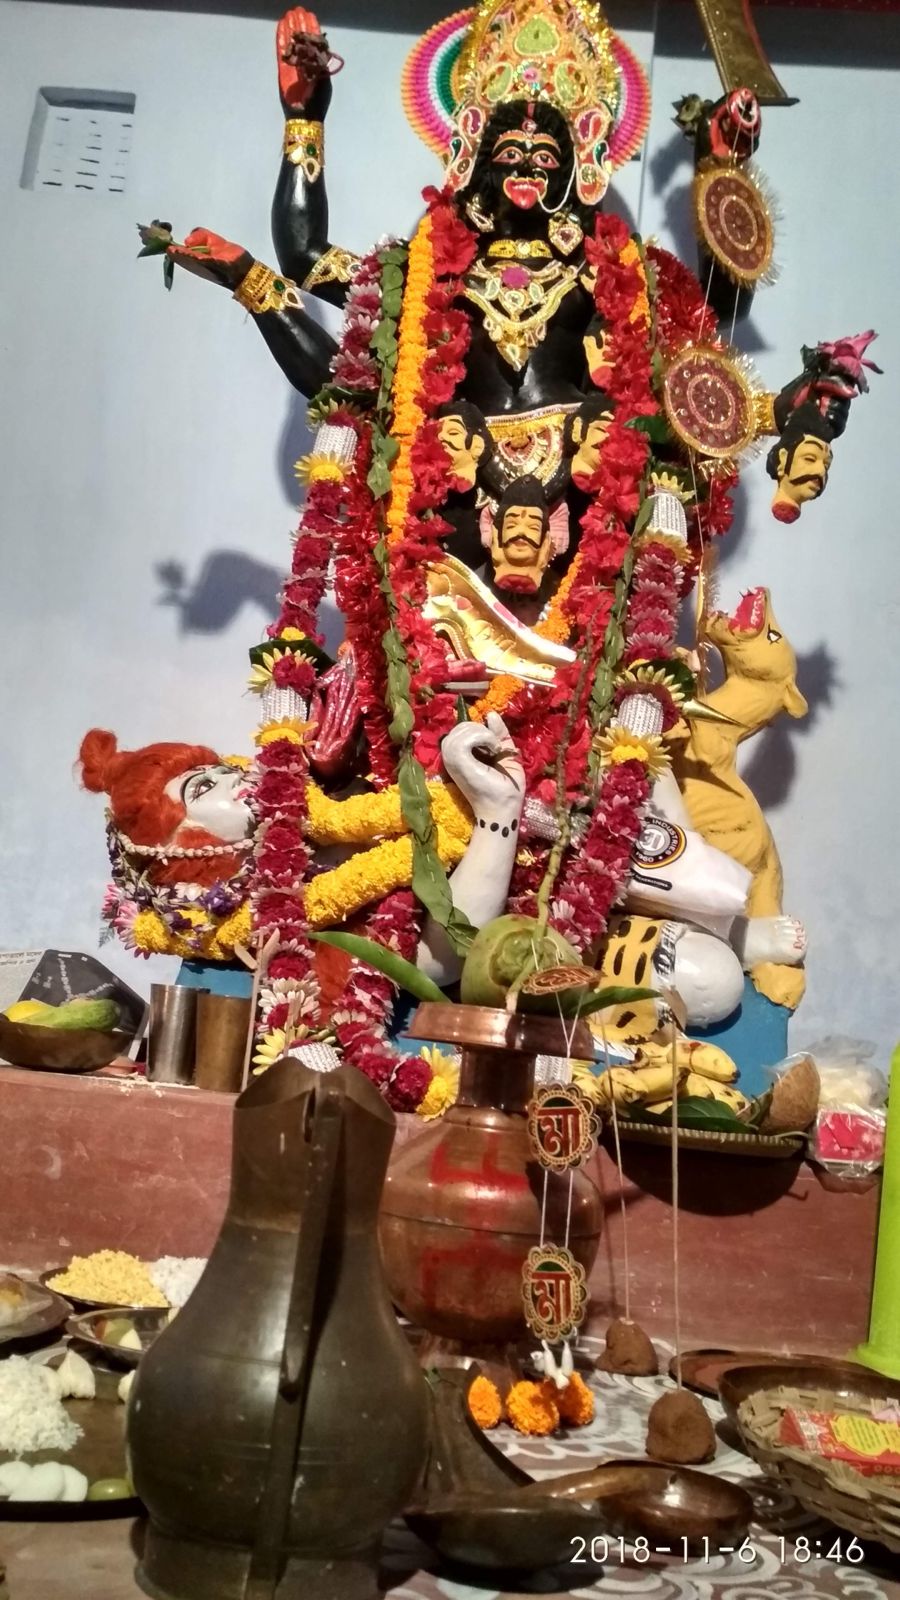 The idol has been decorated with garland and with jewelleries